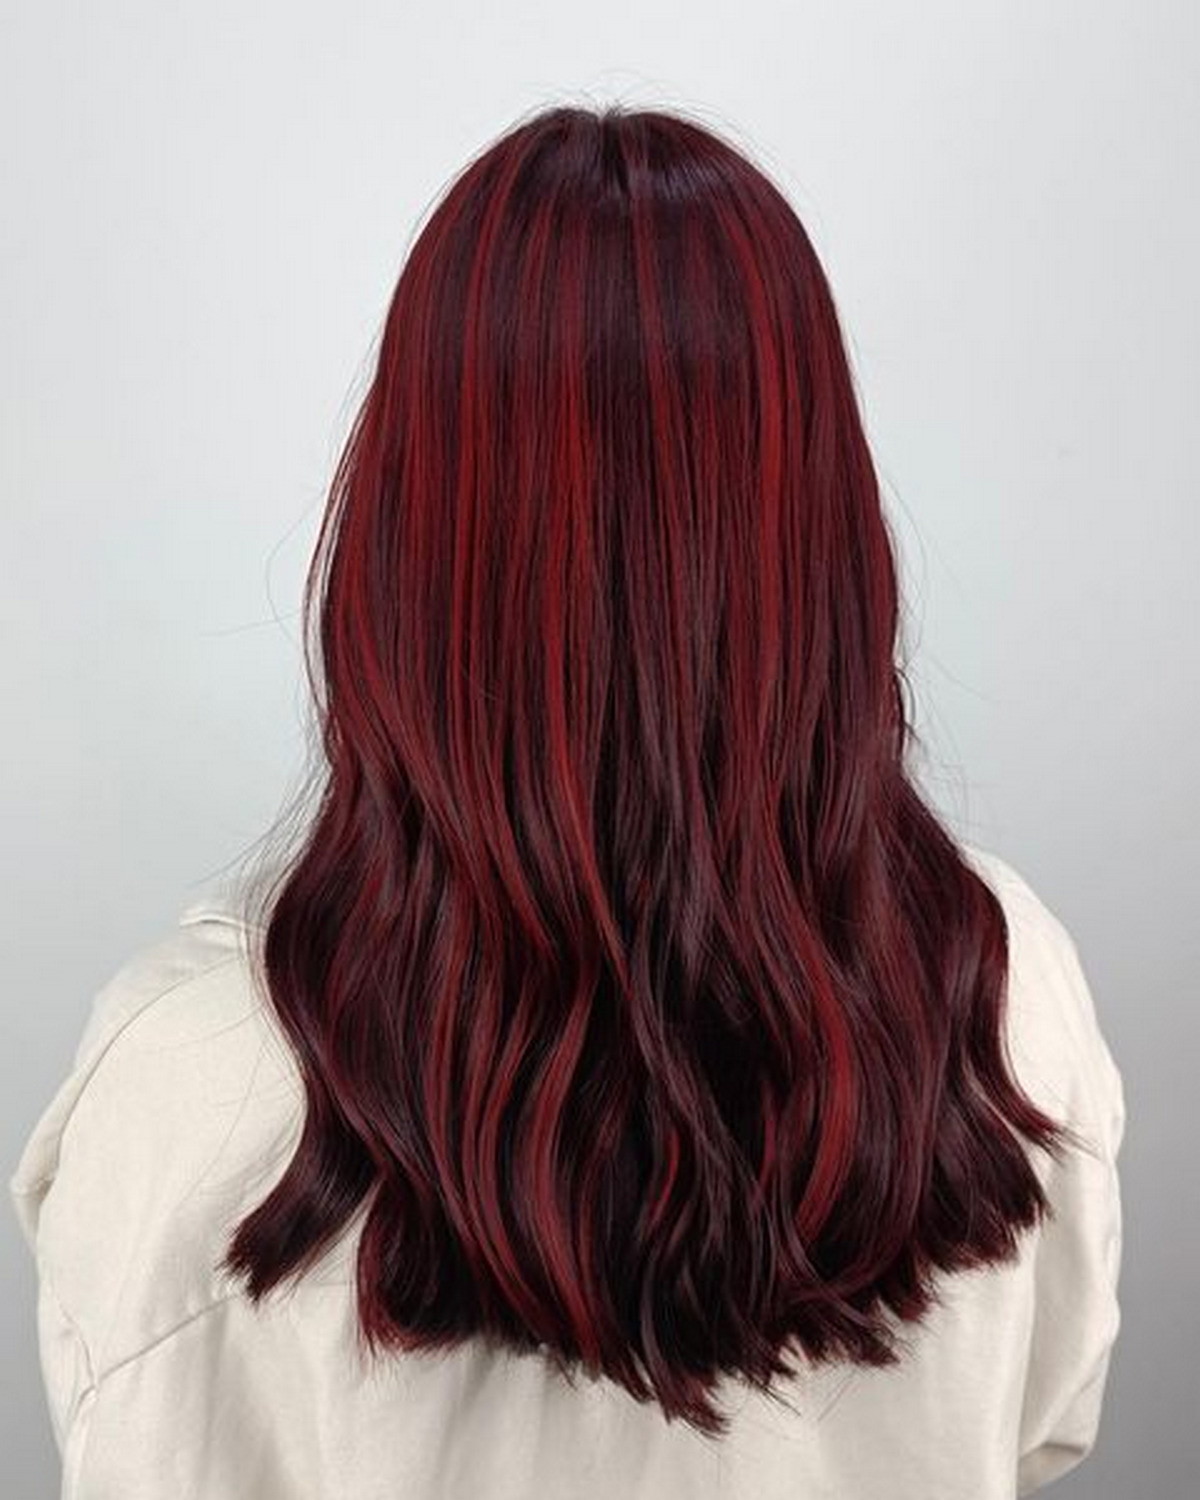 Long Black Hair With Maroon Red Highlights